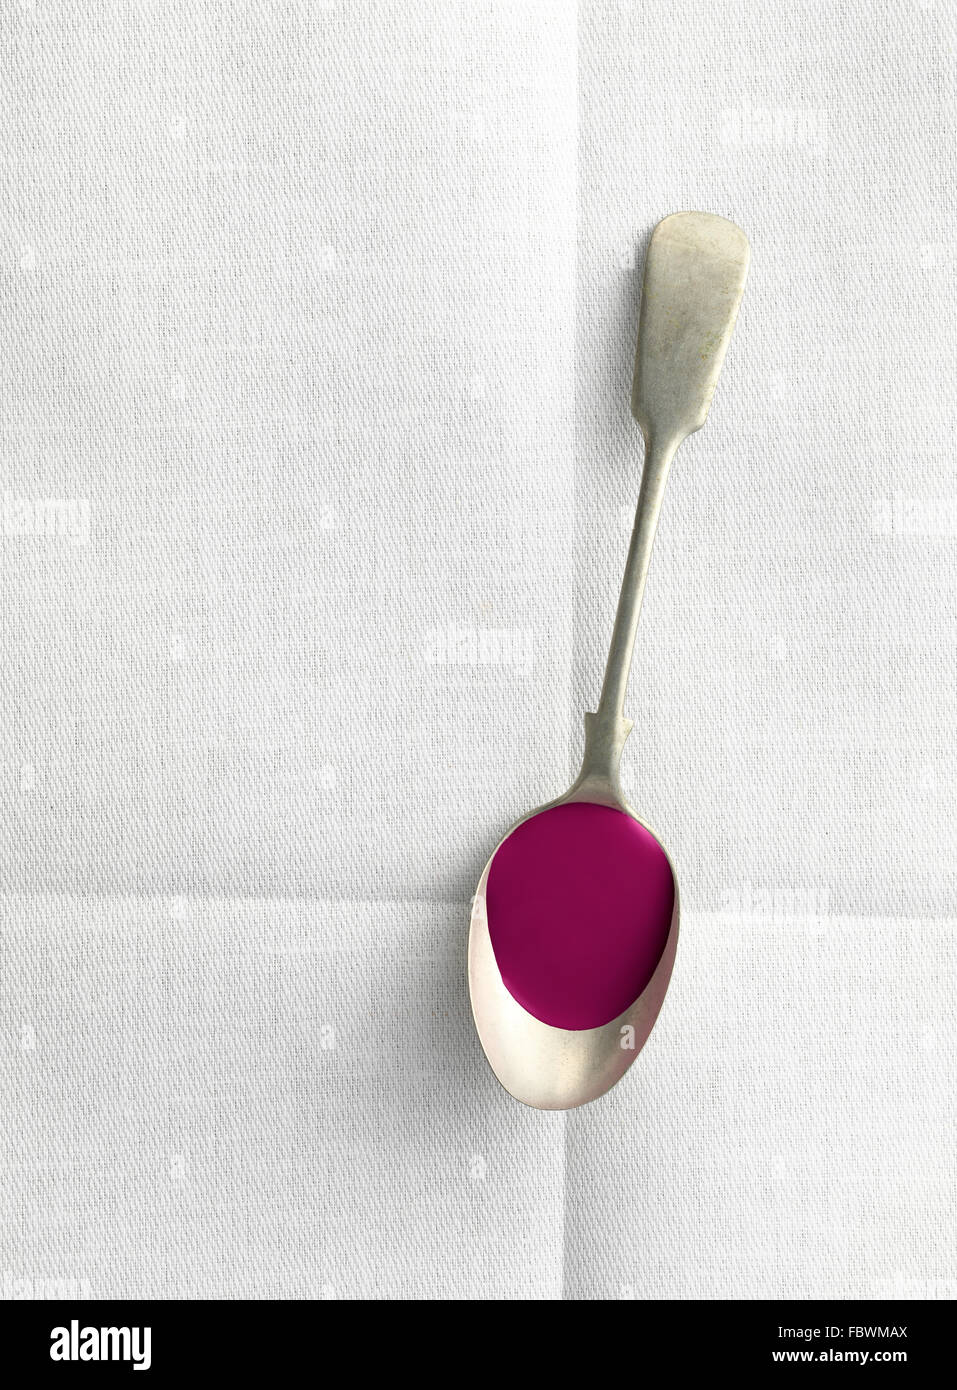 old spoon with liquid on linen table cloth Stock Photo